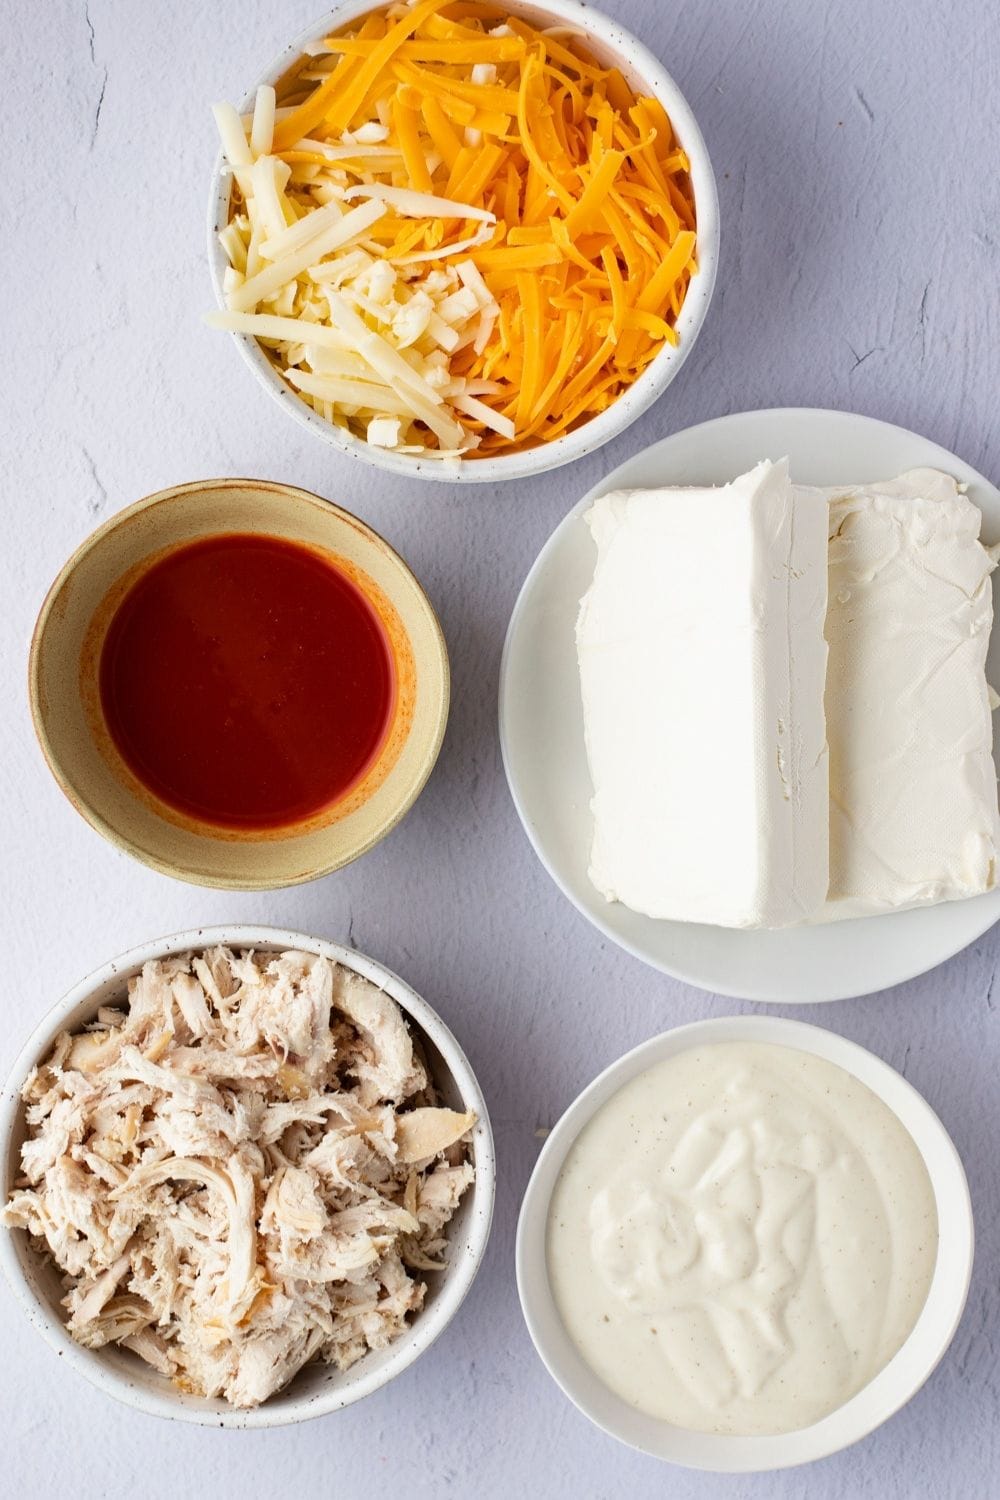 Buffalo Chicken Dip Ingredients: Red Hot Sauce, Chicken, Celery, Blue Cheese and Cream Cheese
